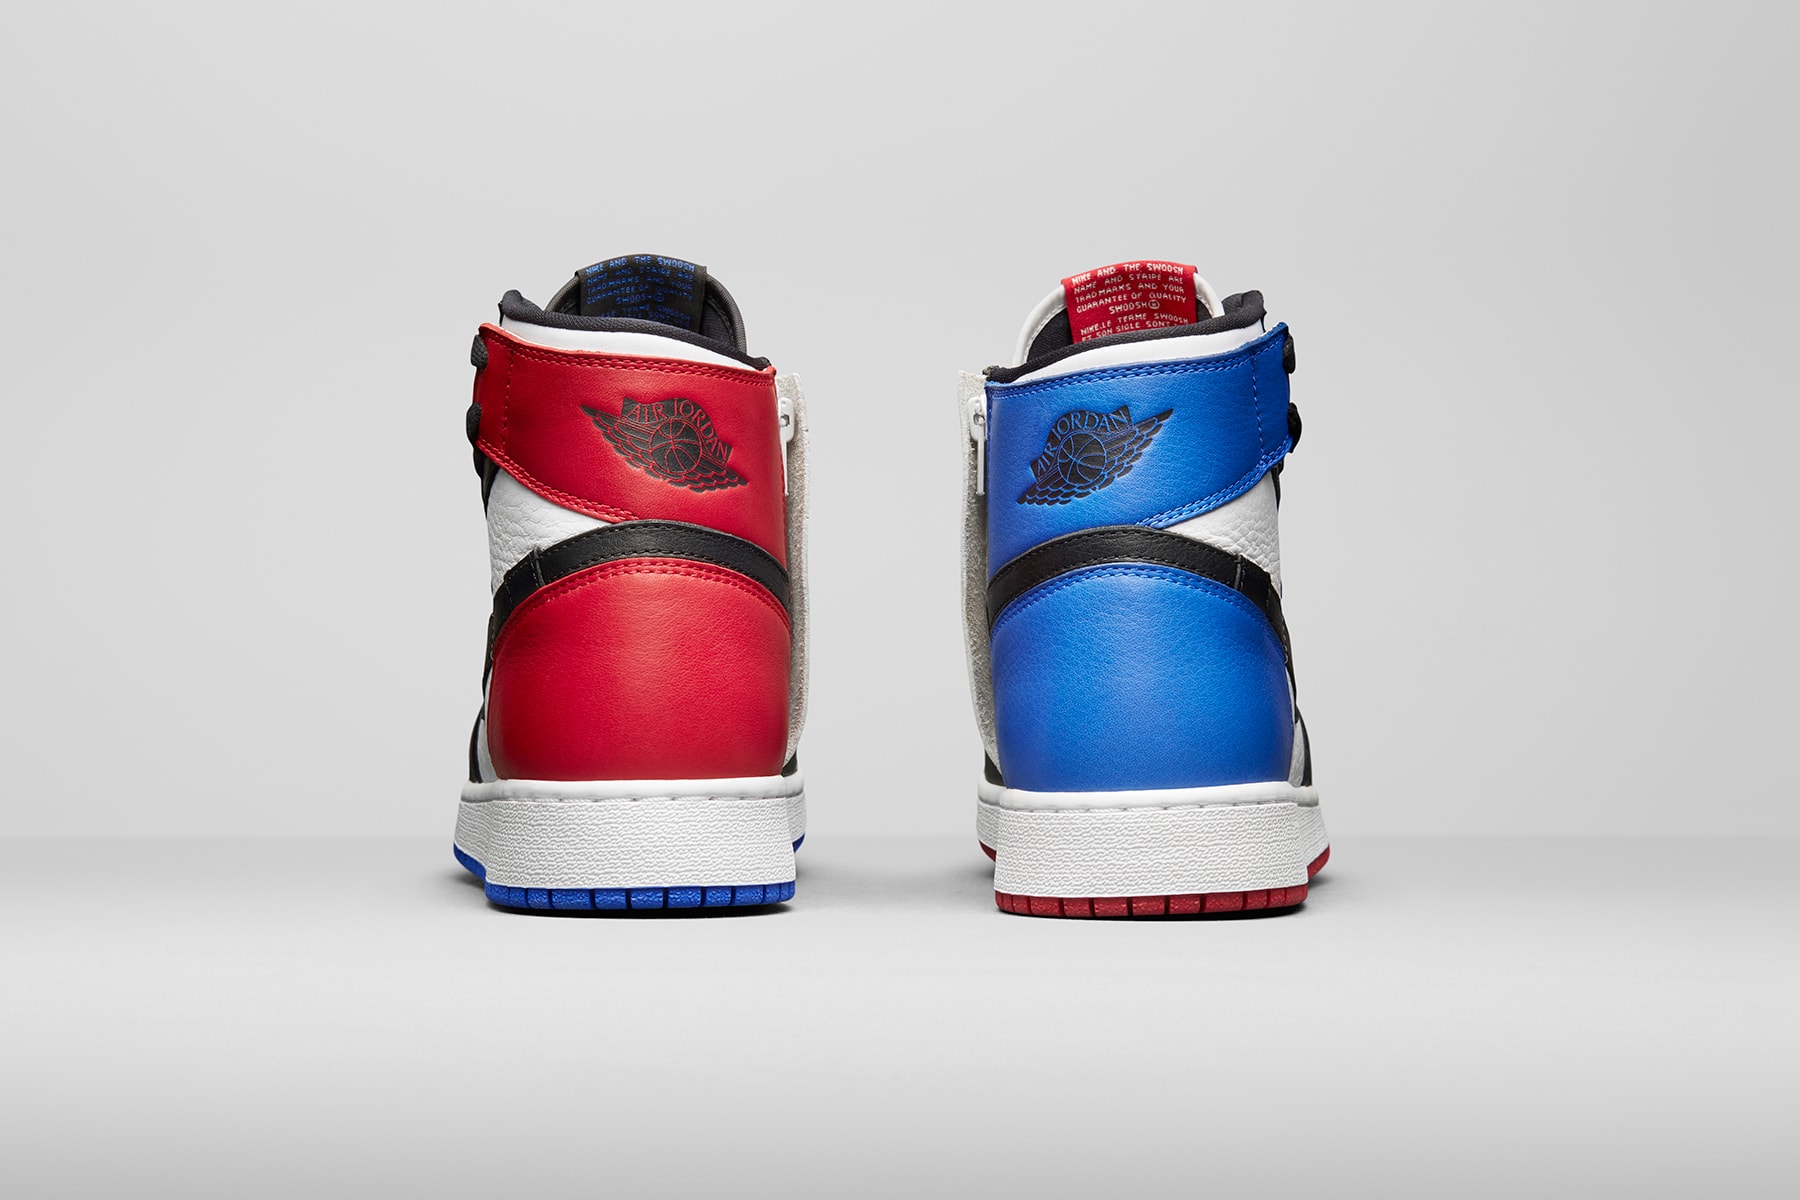 Air Jordan 1 Nike Brand Rebel XX Reimagined Top 3 Bred Royal Chicago Blue Red White Black Release Price Date